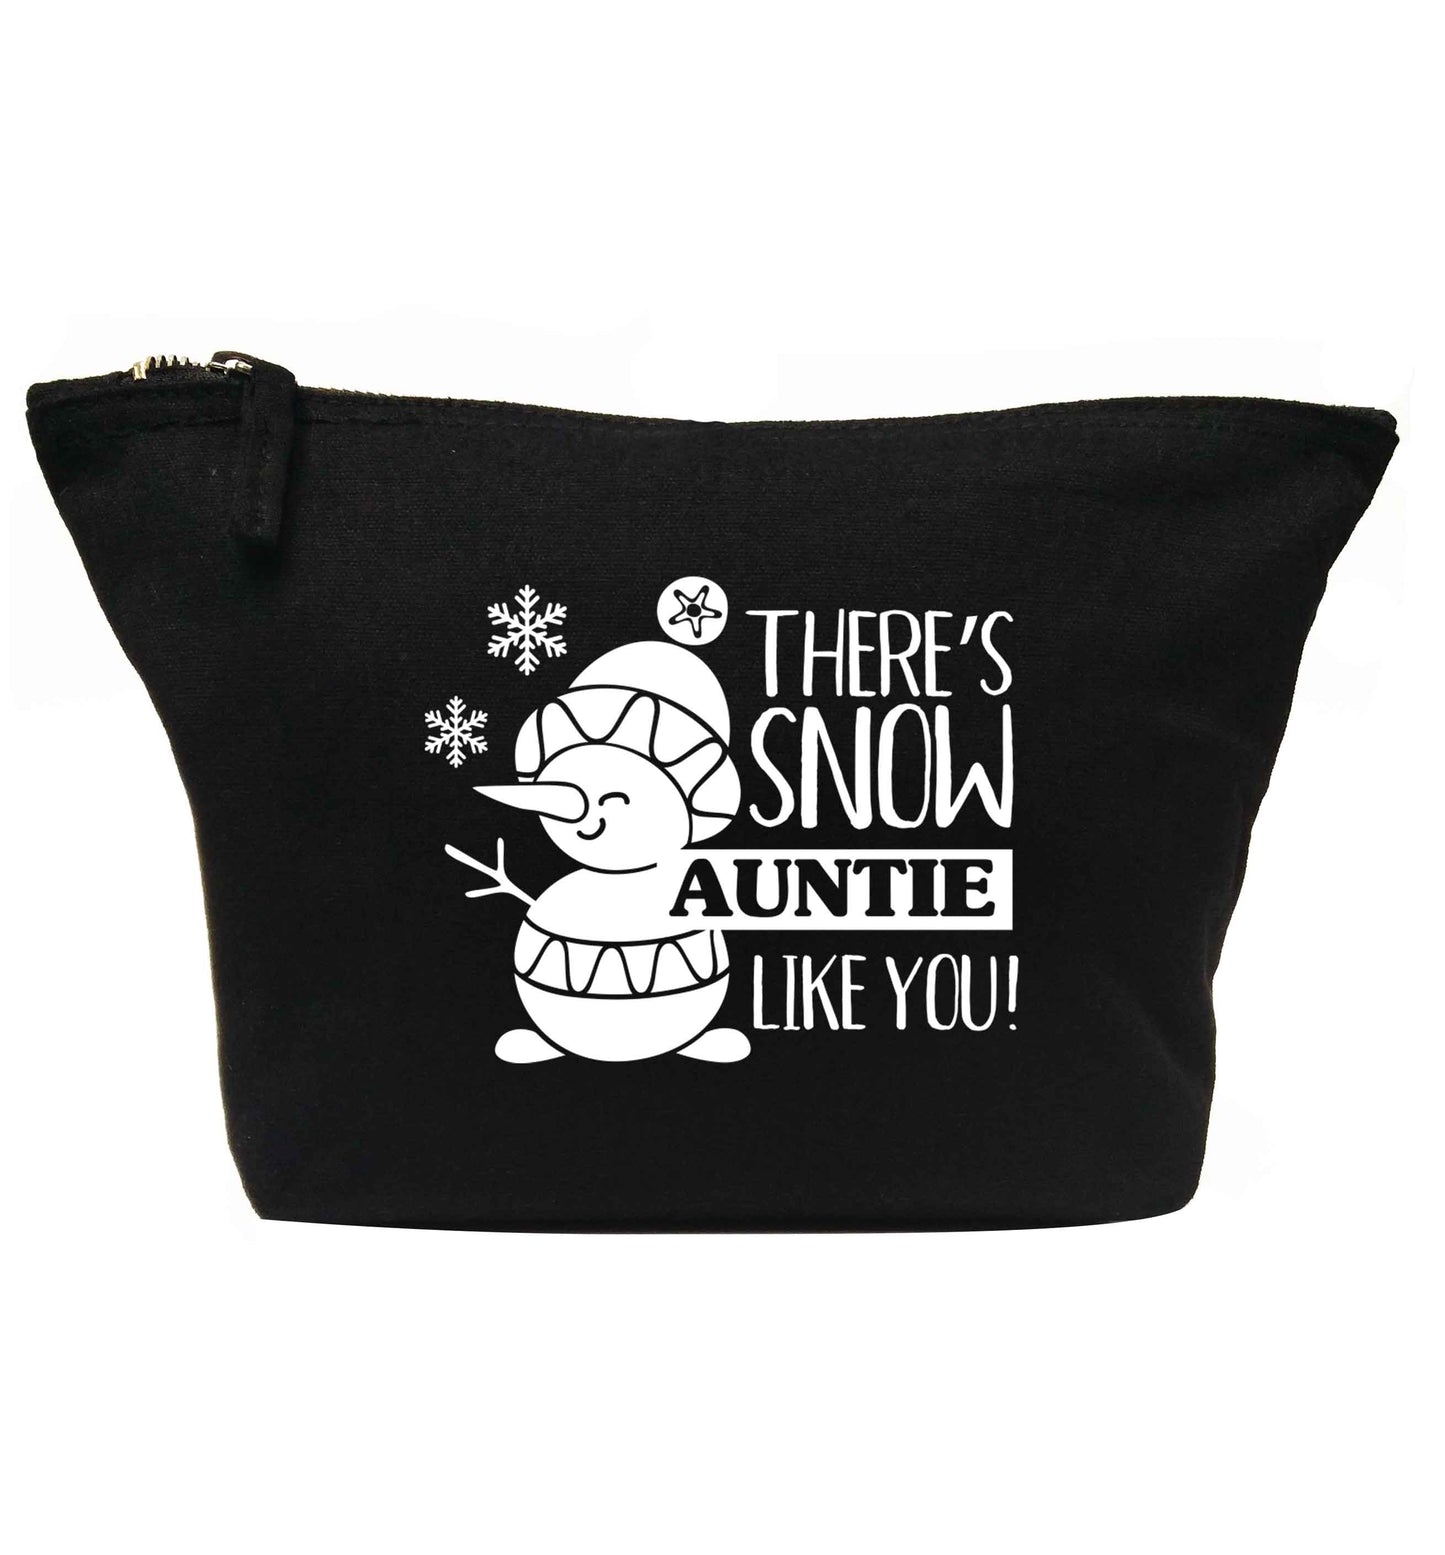 There's snow auntie like you | Makeup / wash bag